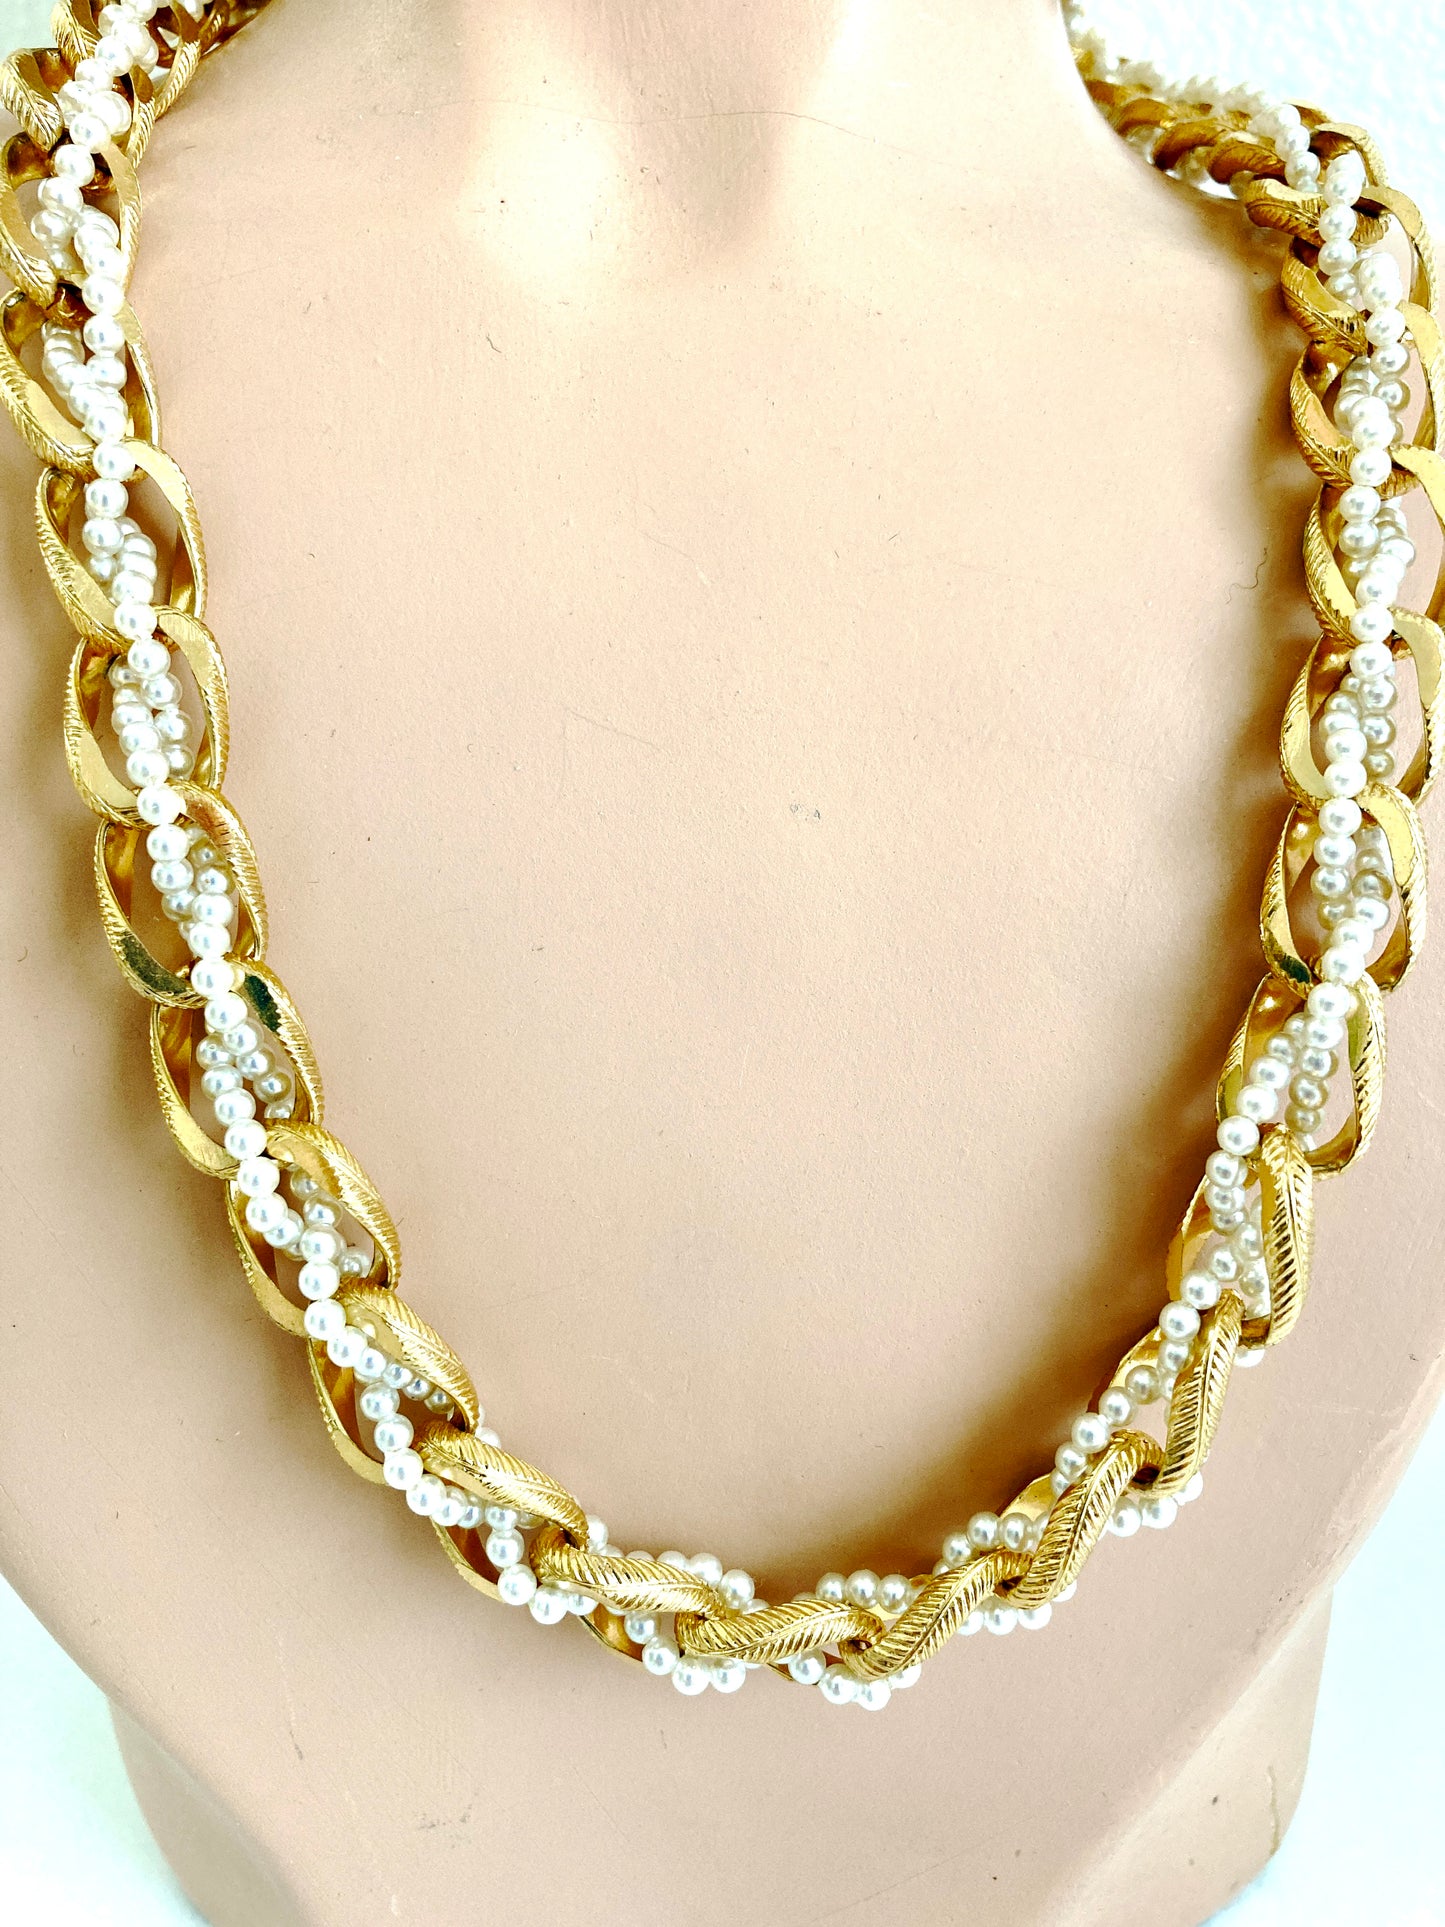 Gold Tone Textured Chain with Woven Pearl Necklace